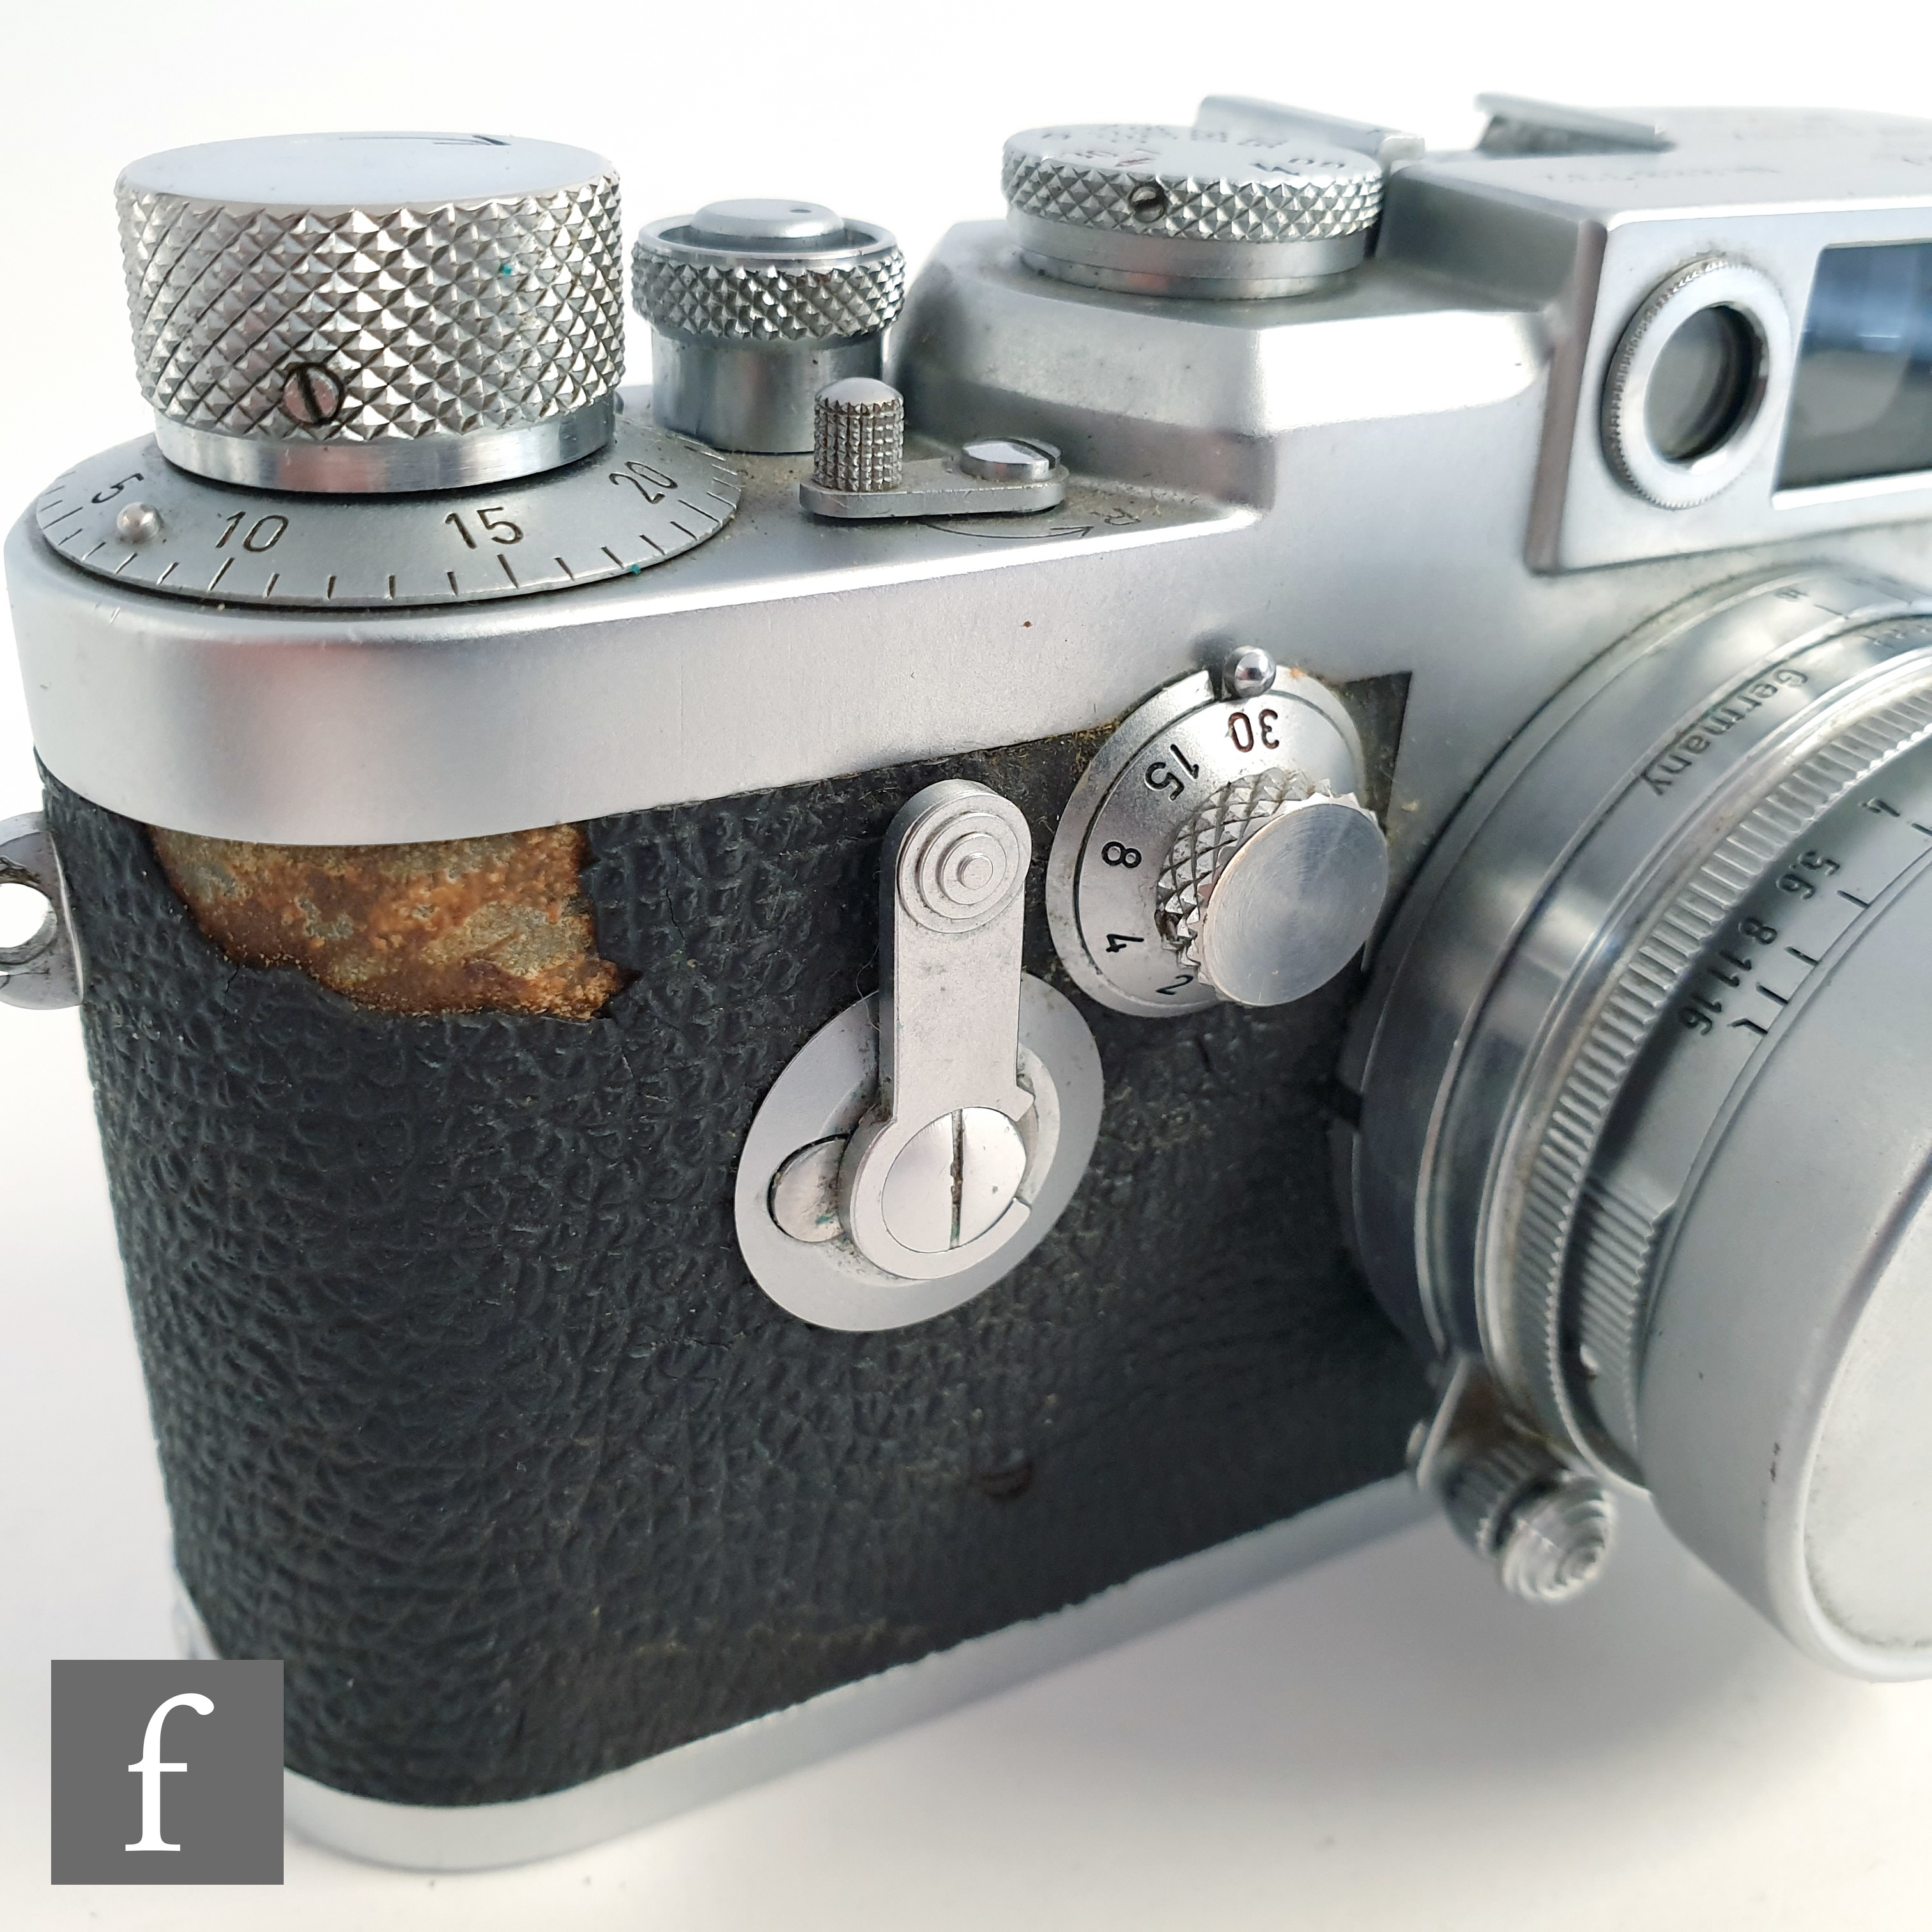 A Leica IIIG rangefinder screw mount camera, circa 1957, serial number 888732, with Ernst Leitz f= - Image 6 of 6